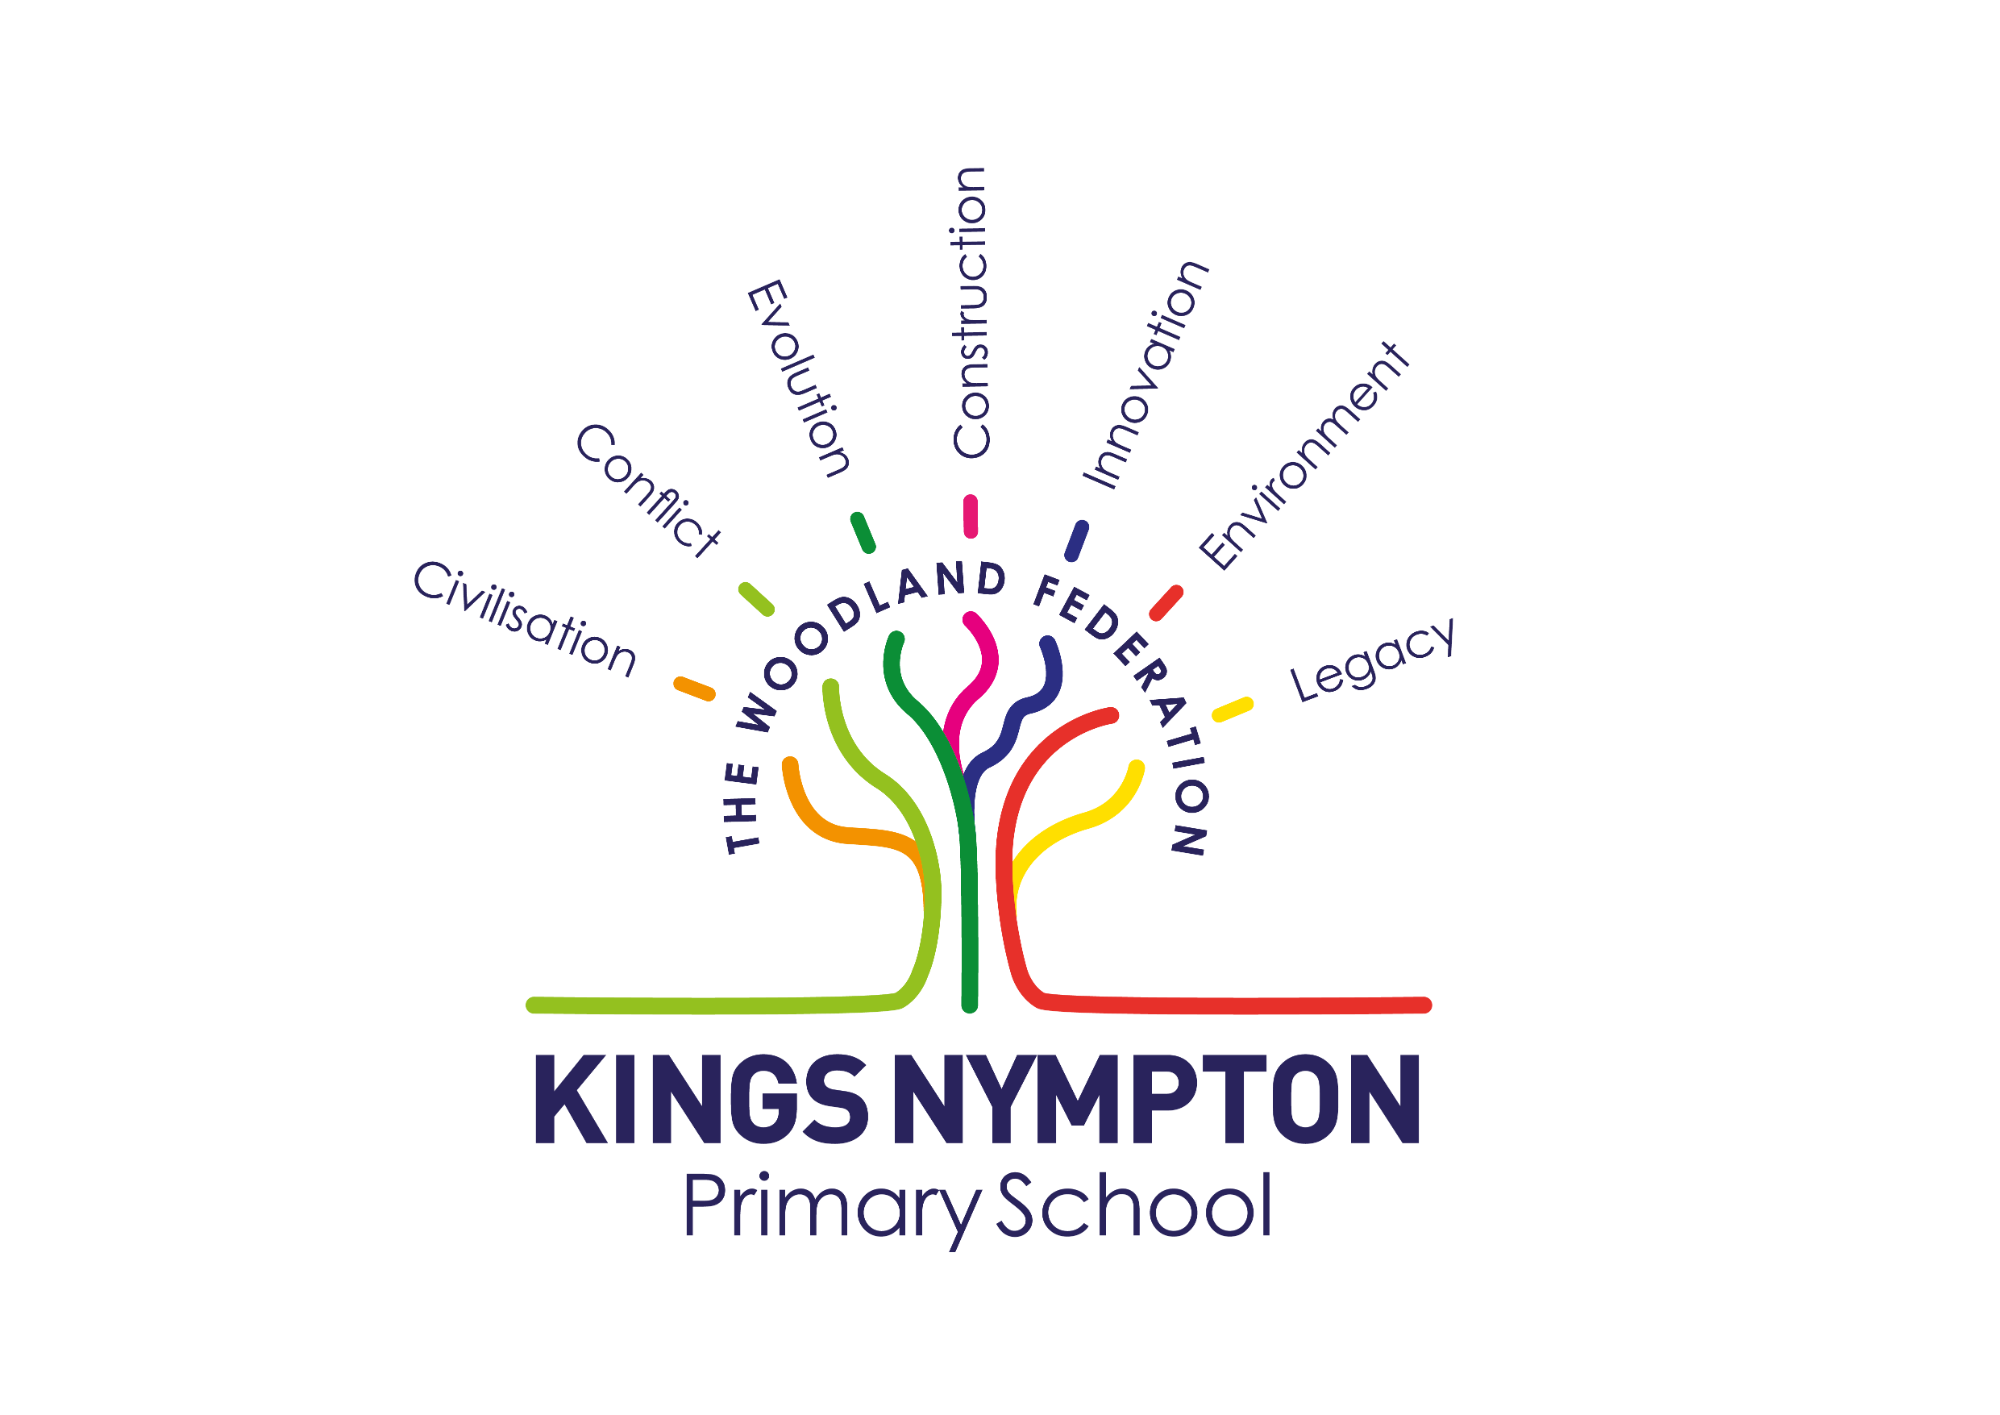 Kings Nympton Logo featuring concepts of Civilisation, Conflict, Evolution, Construction, Innovation, Environment and Legacy